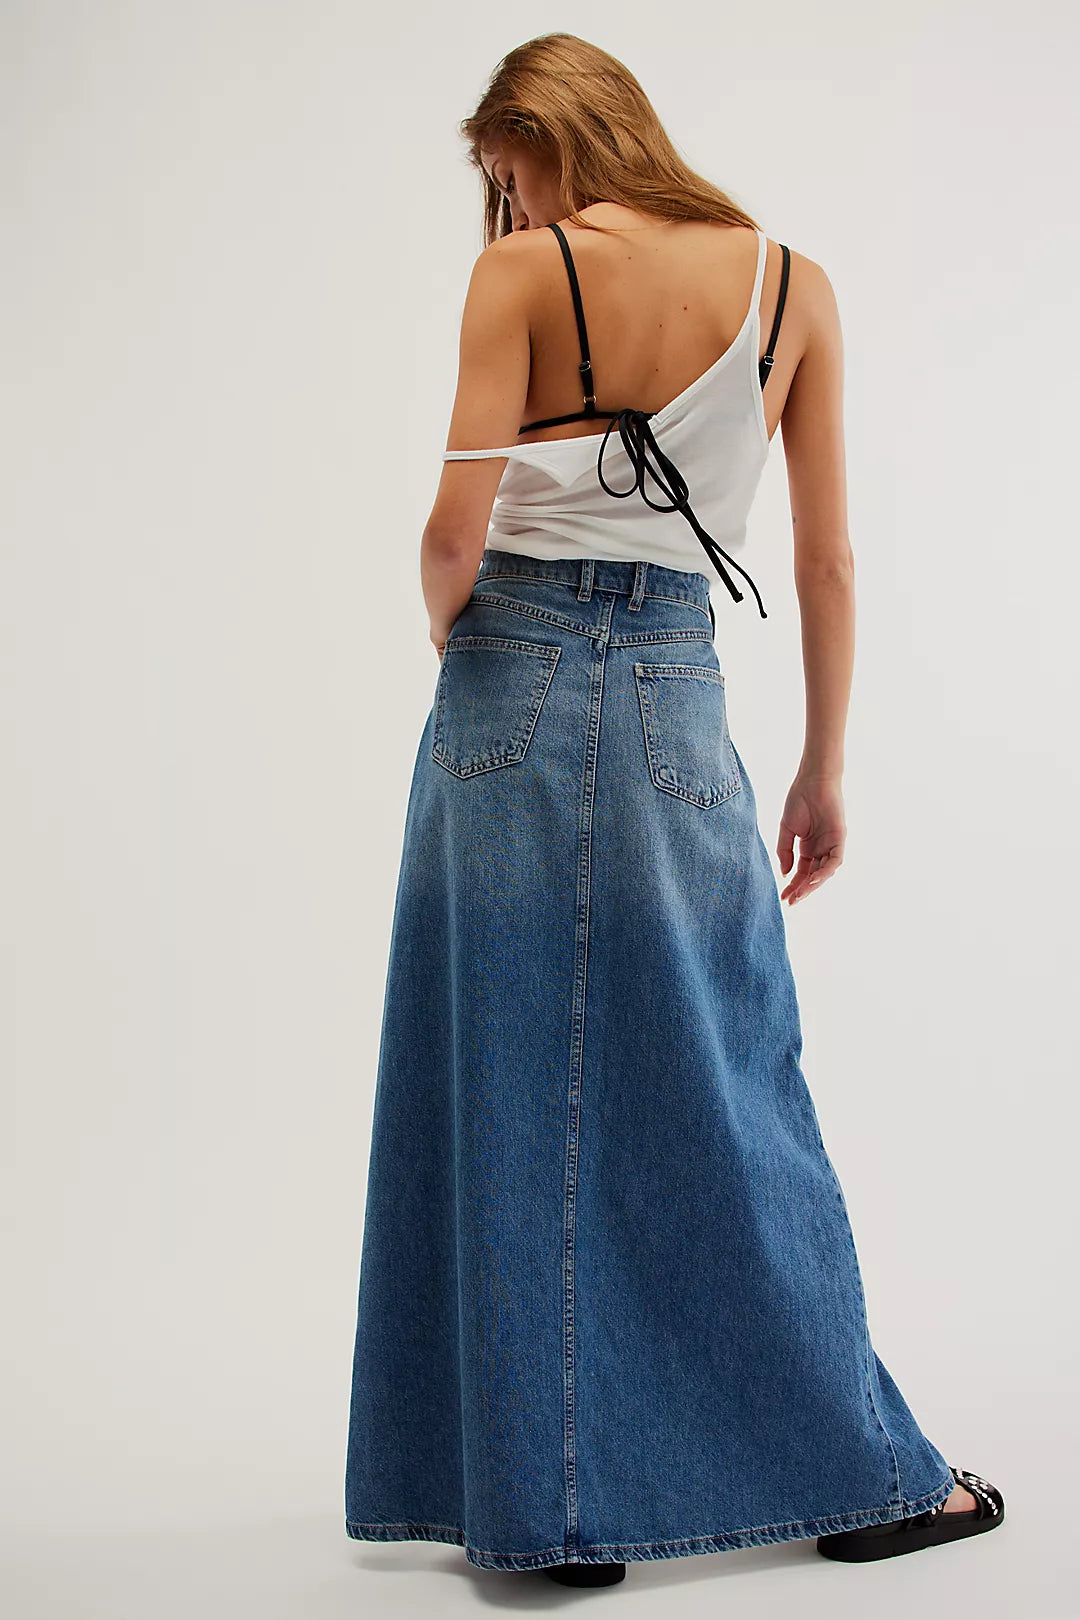 Free People Come as You Are Denim Maxi